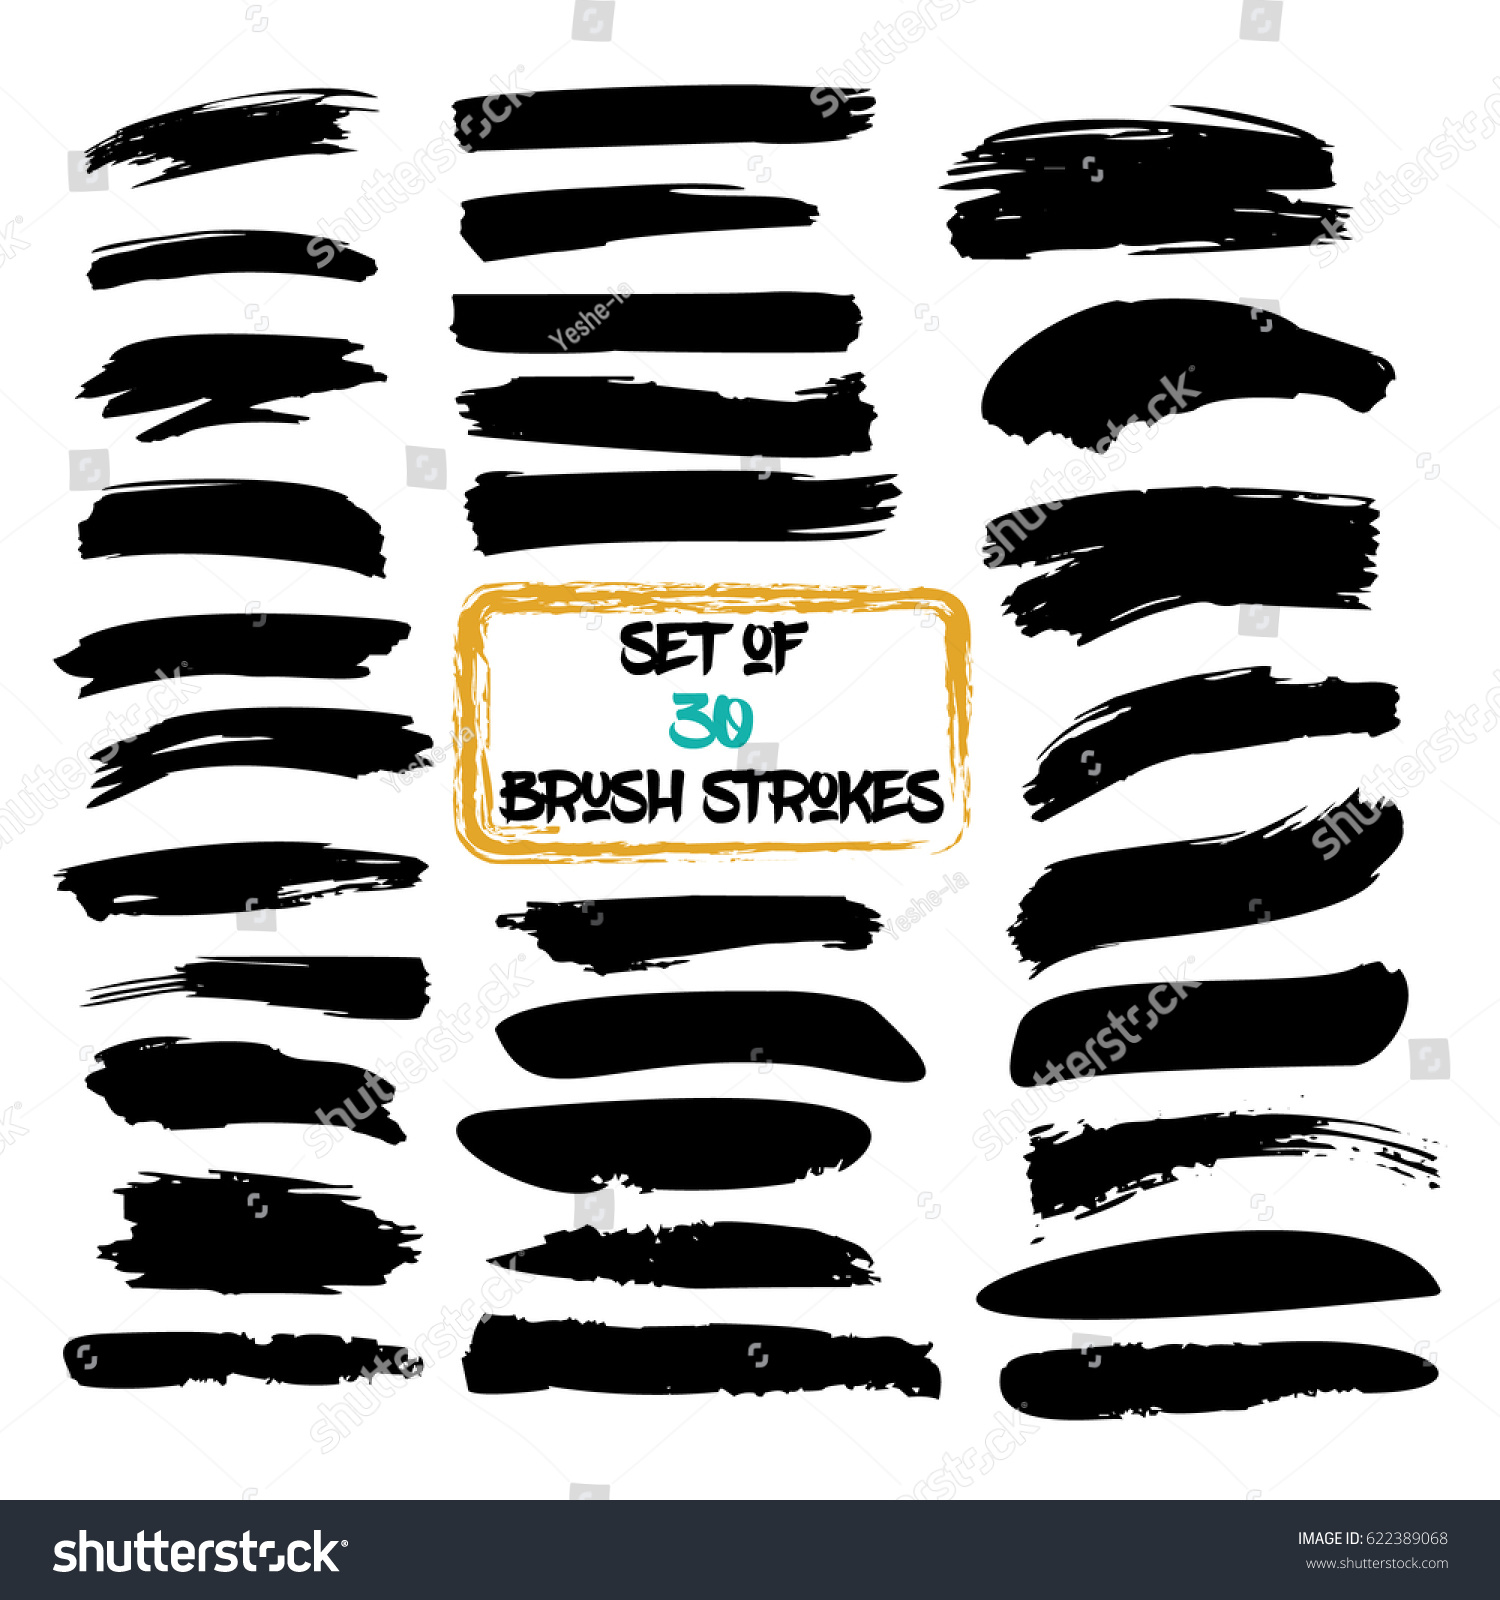 SVG of Set of thirty trendy black vector brush strokes or backgrounds. Hand painted black ink brush strokes, brushes, and lines. Dirty grunge artistic design elements.  svg